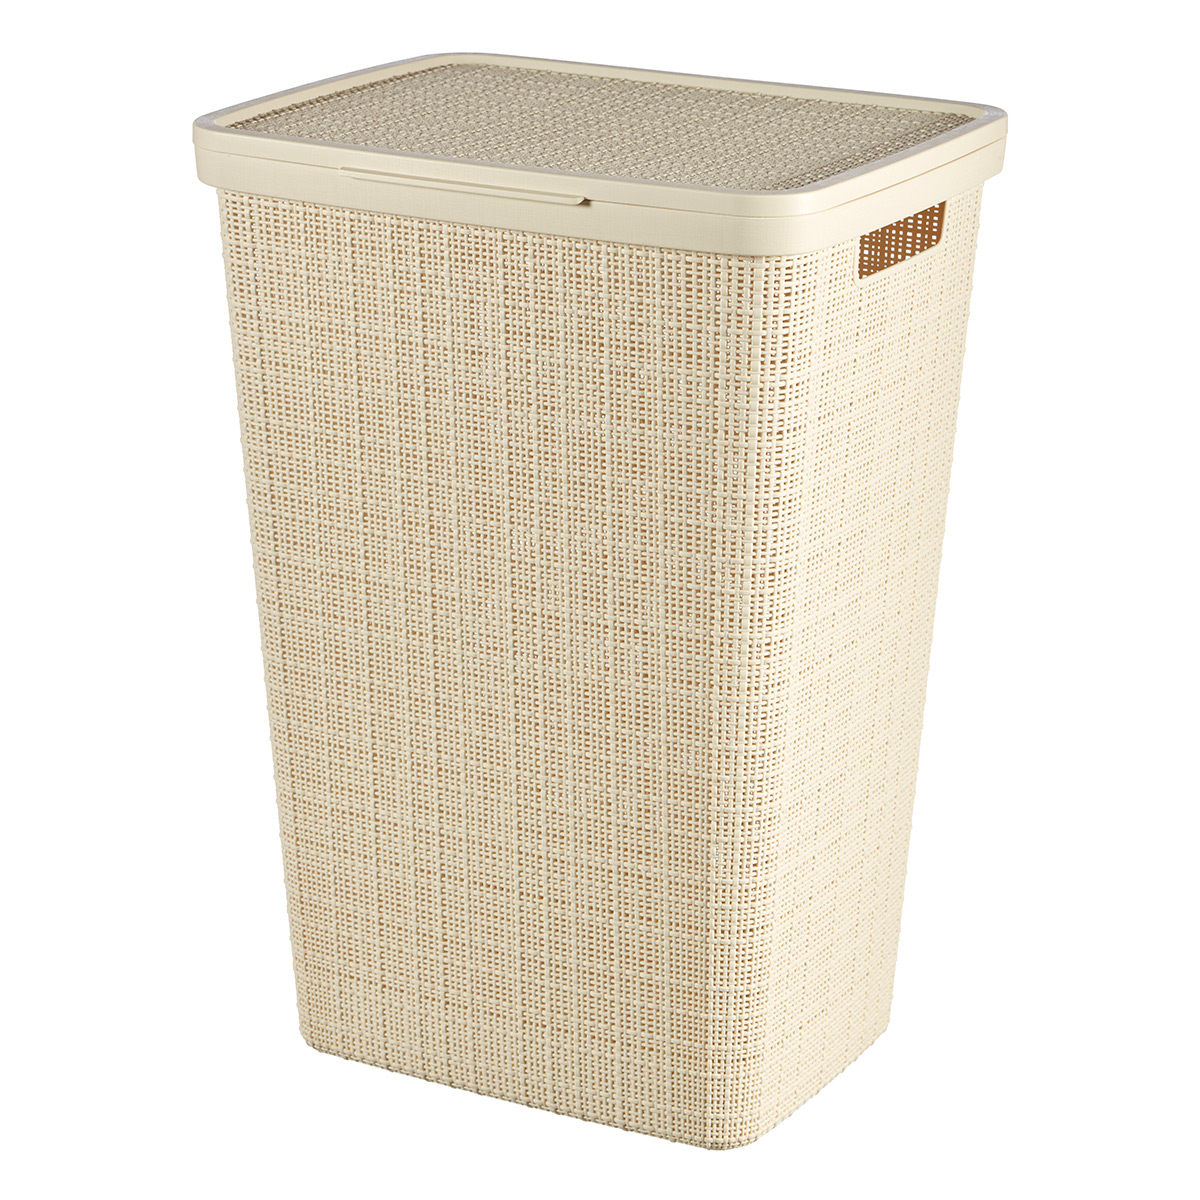 Curver Jute Laundry Hamper | The Container Store